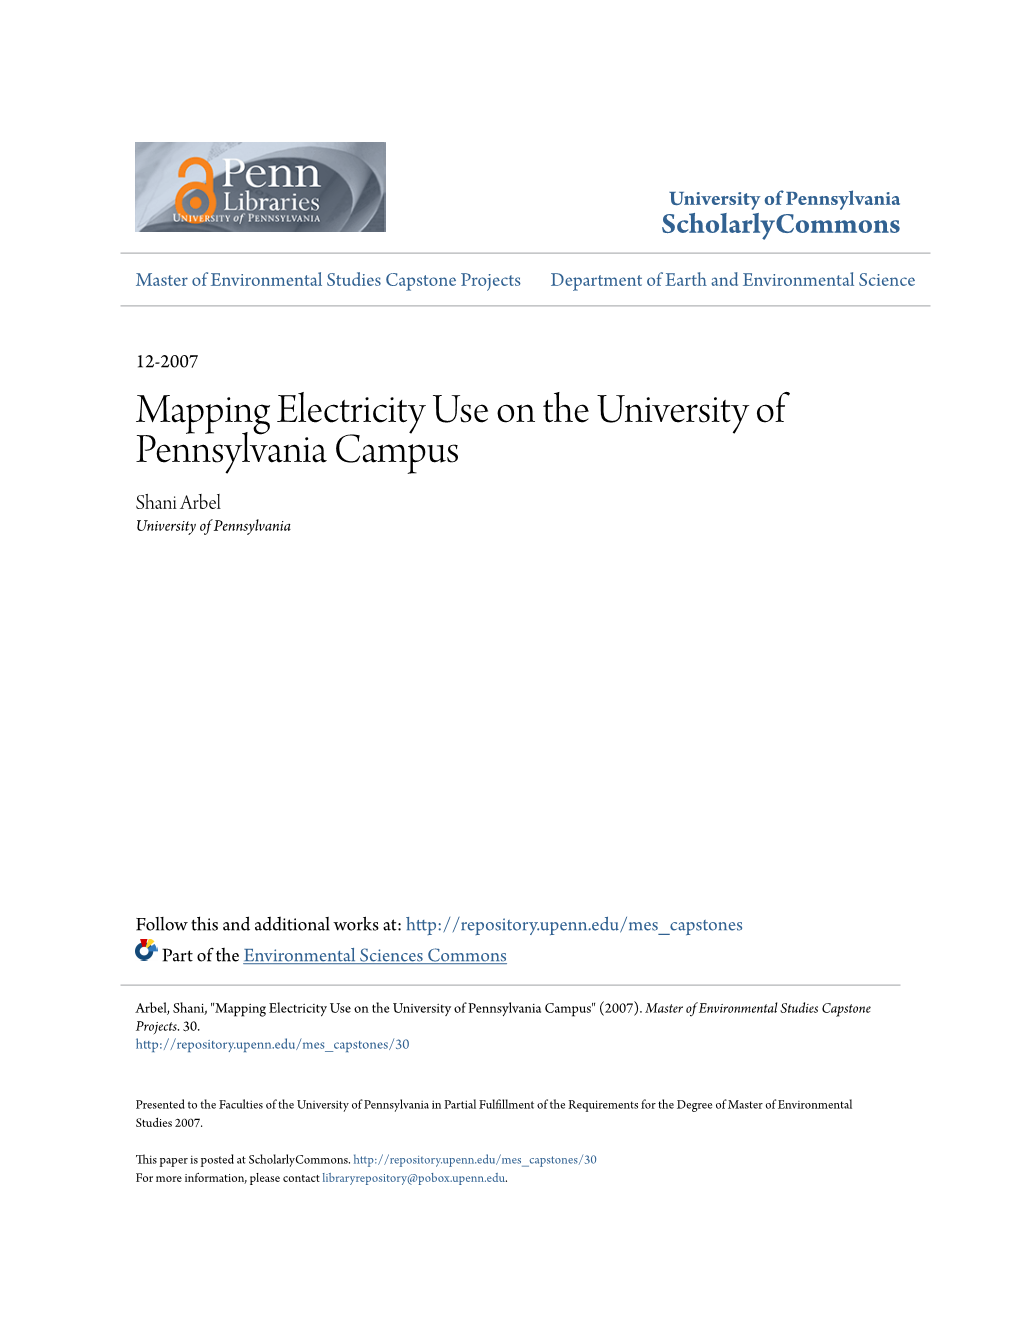 Mapping Electricity Use on the University of Pennsylvania Campus Shani Arbel University of Pennsylvania